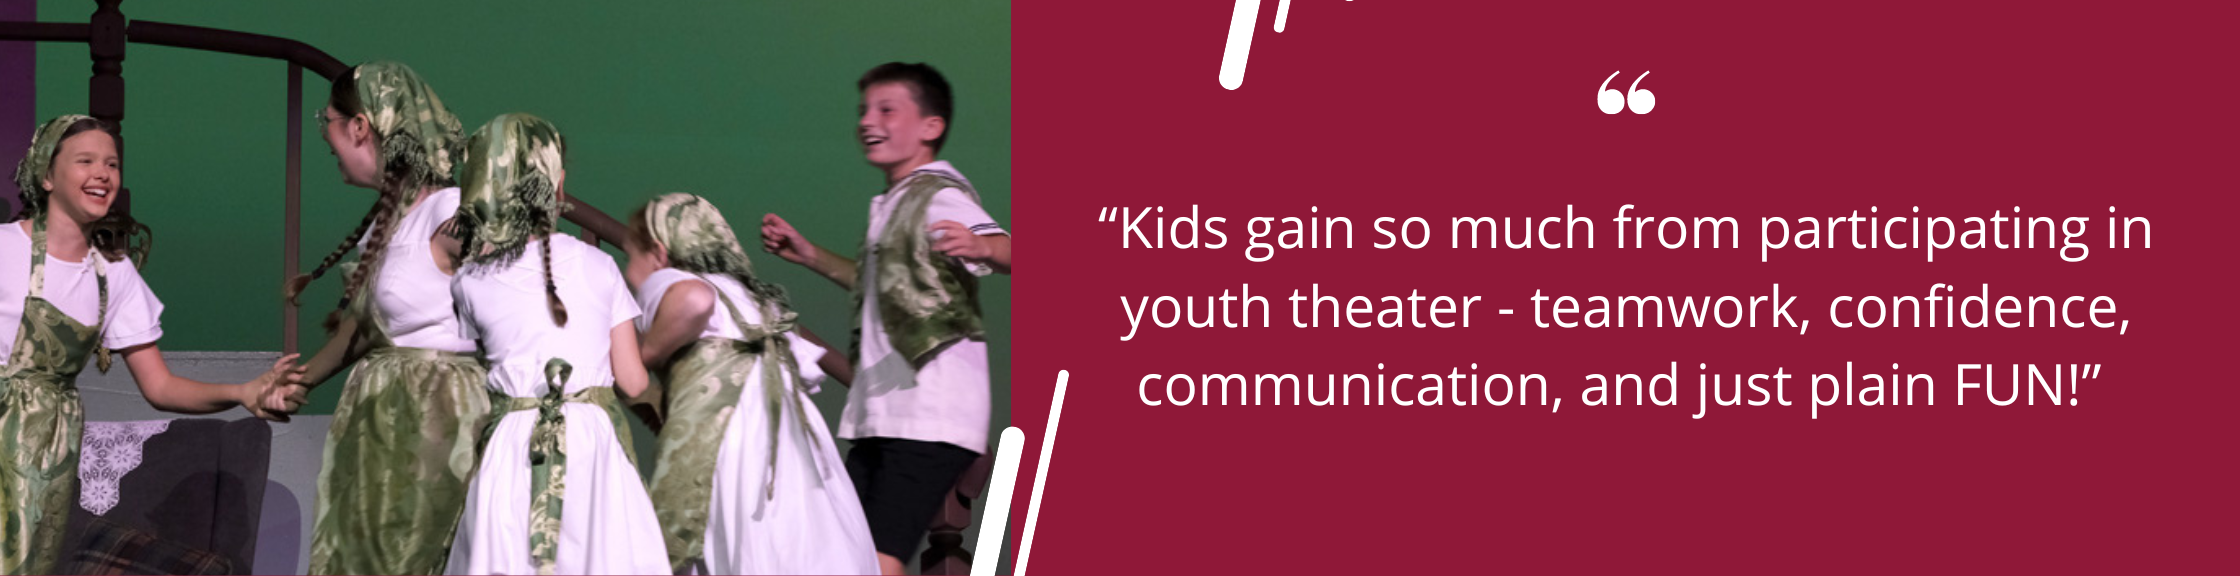 “Kids gain so much from participating in youth theater - teamwork, confidence, communication, and just plain FUN!” 